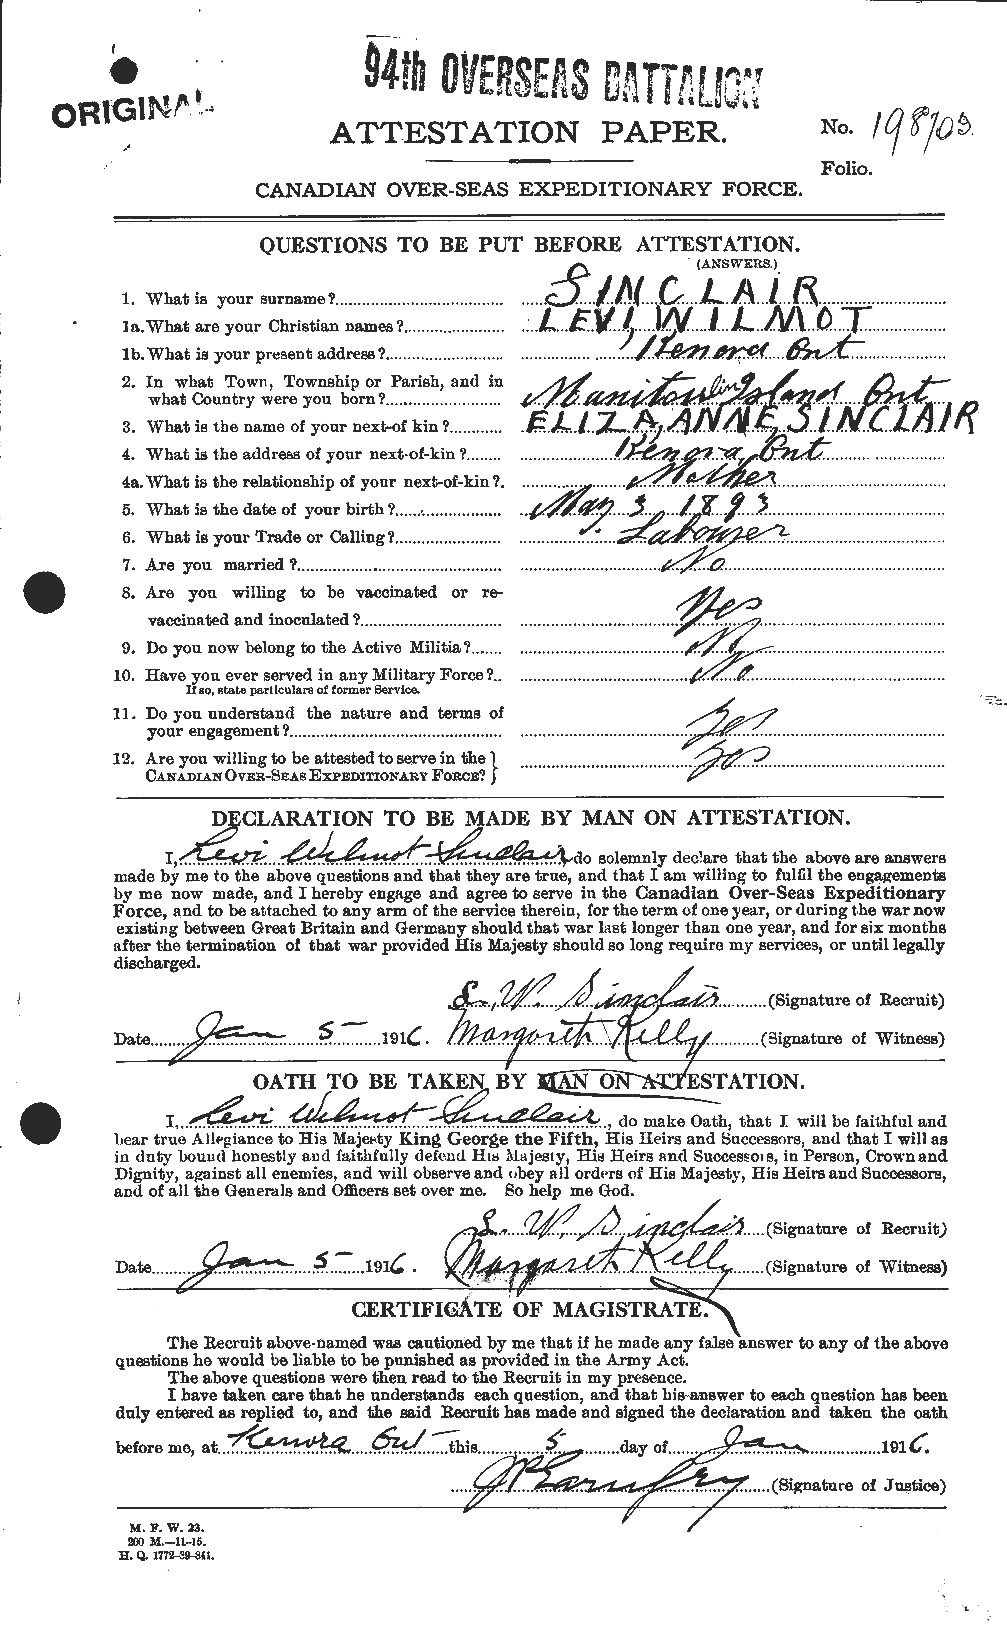 Personnel Records of the First World War - CEF 622485a